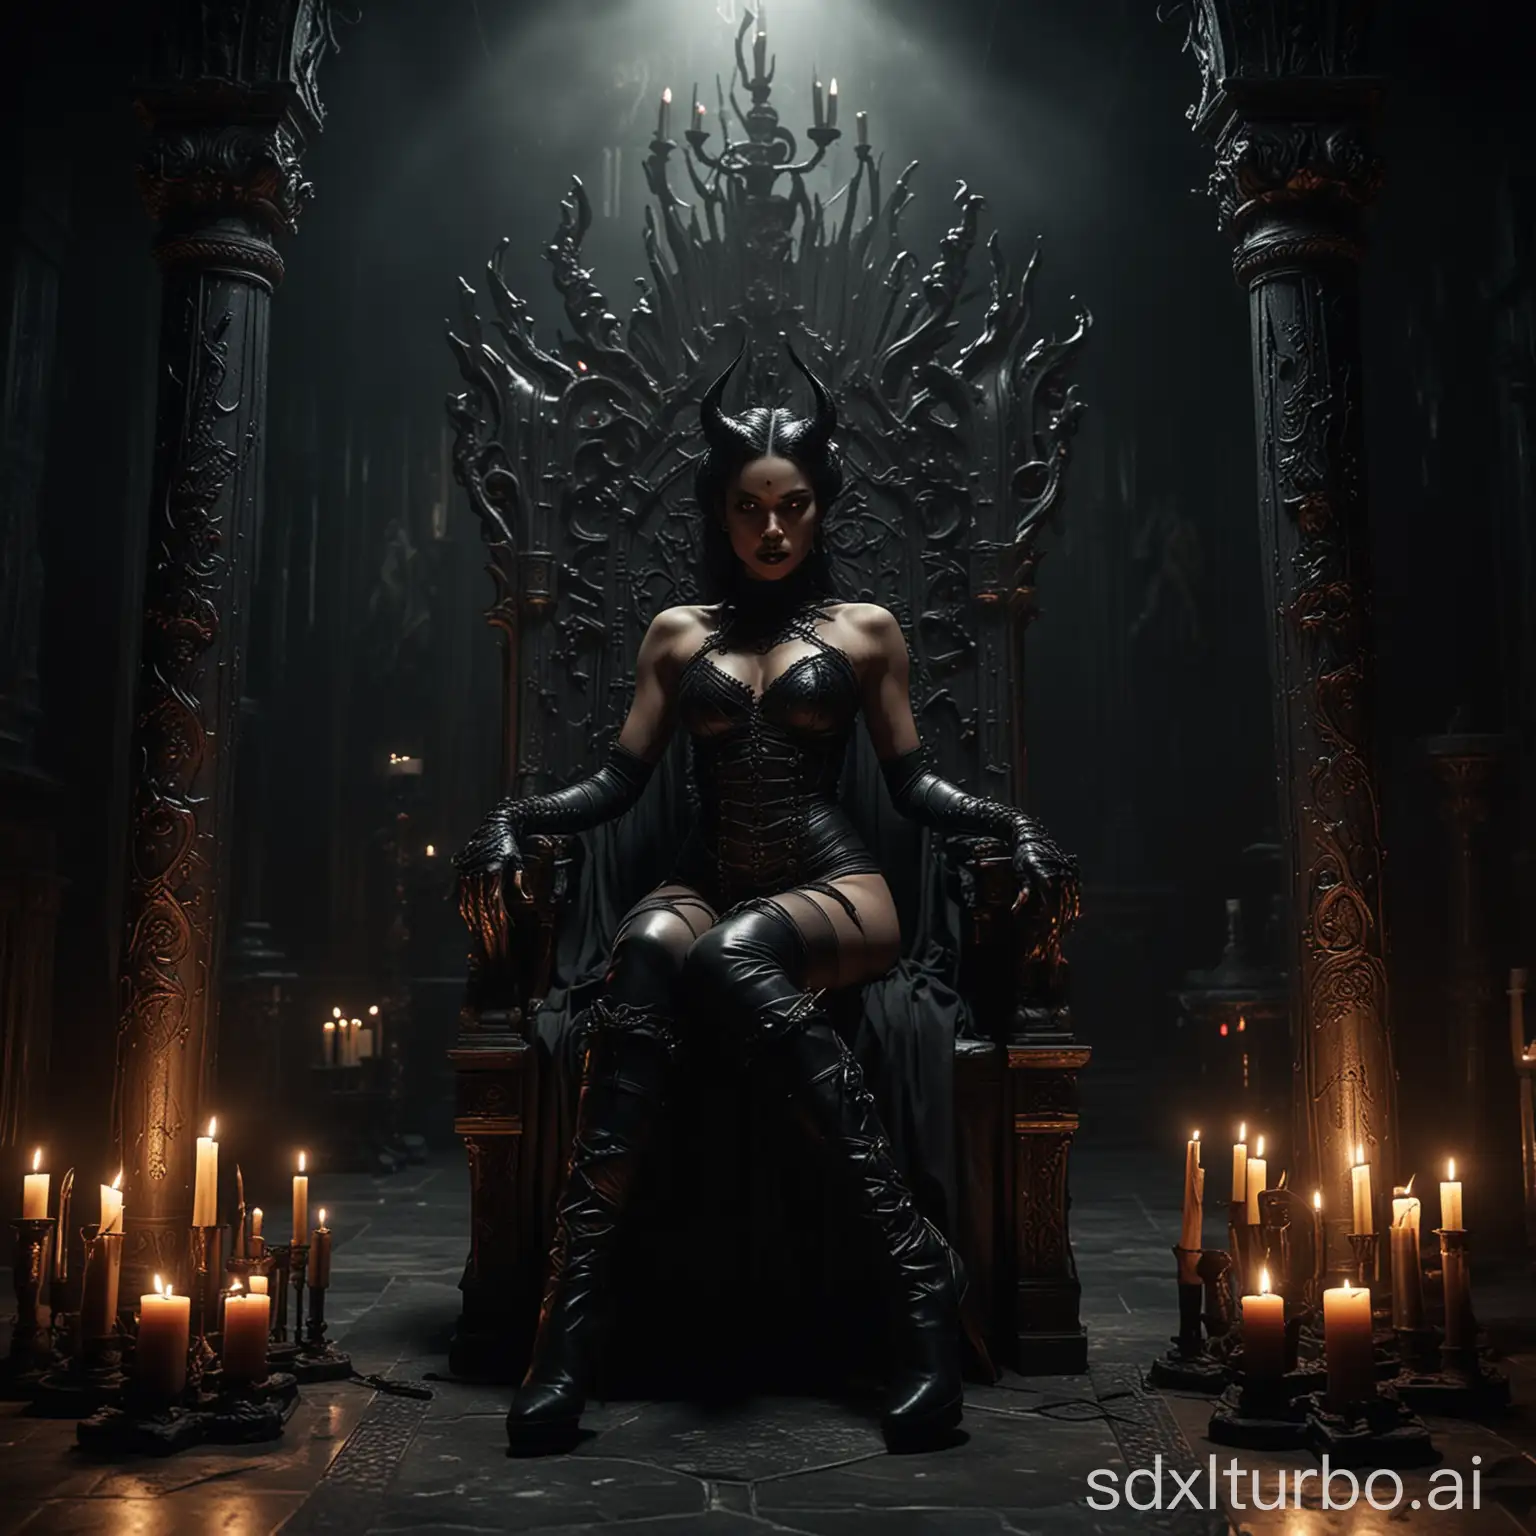 In the depths of an eerie chamber, a captivating high-quality cinematic photo captures a seductive black demon woman , adorned with sinister-looking high-heeled boots, sitting majestically on an intricately carved black throne. Her dark beauty is accentuated by her glowing eyes, which pierce the surrounding darkness. The flickering glow of black candles casts haunting shadows across the chamber, adding to the chilling atmosphere. The demonic woman's poise and commanding presence dominate the scene, exuding an intense power and darkness that leaves an indelible impression on all who behold her., cinematic, photo